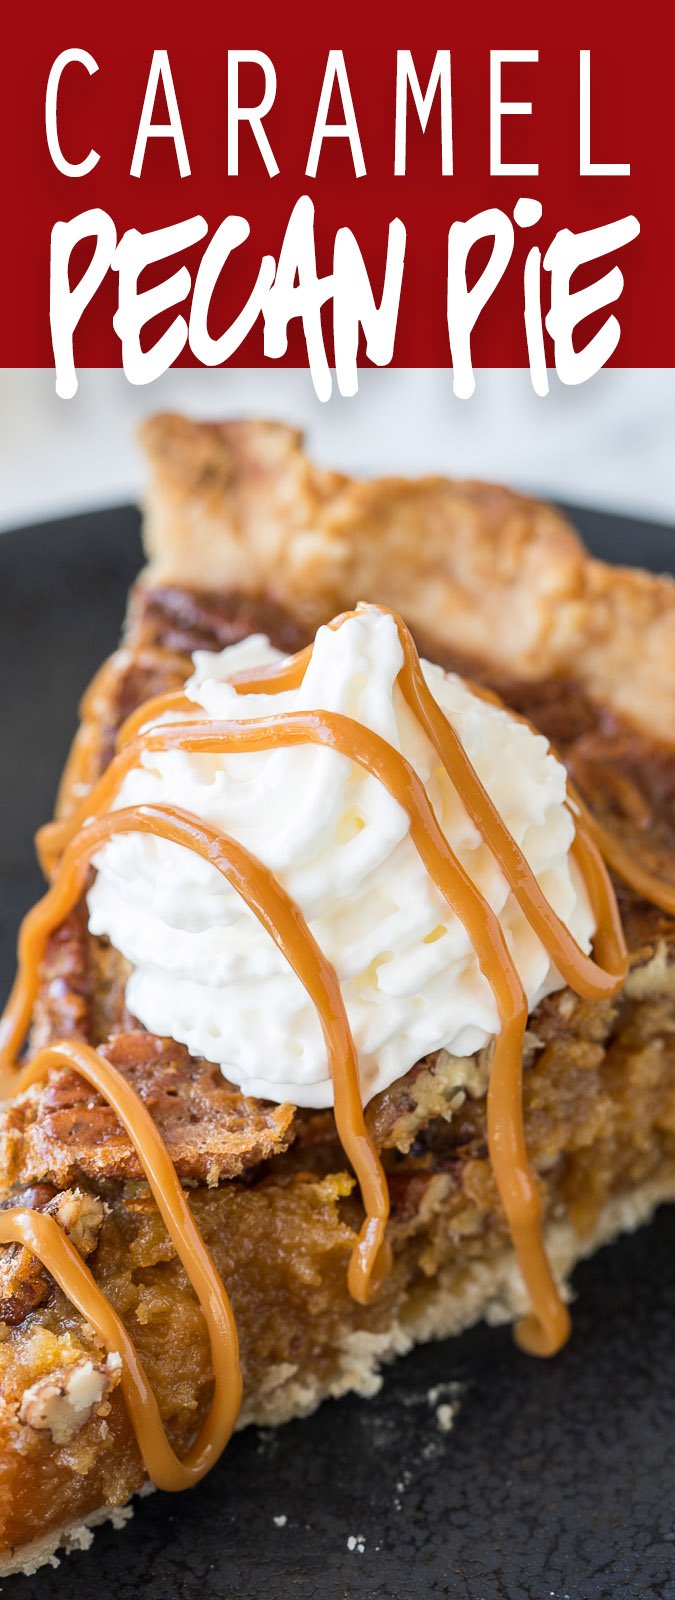 This Caramel Pecan Pie recipe is my new favorite Thanksgiving pie! So easy and no corn syrup!